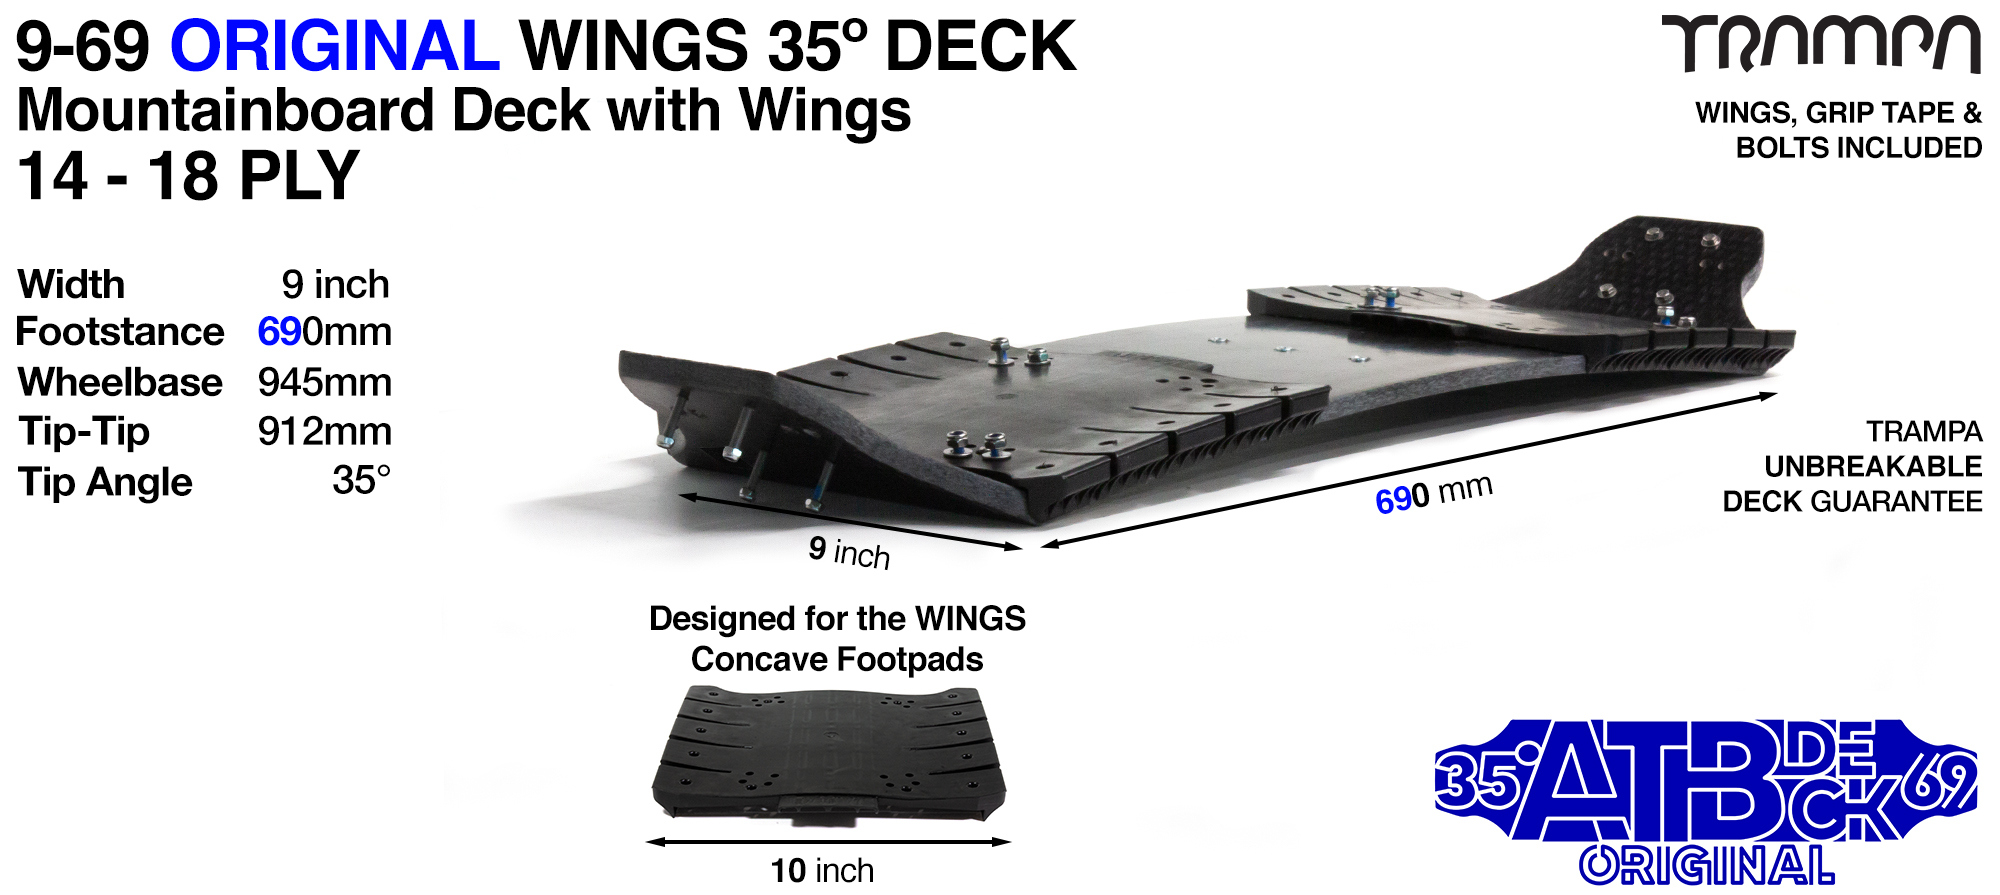 TRAMPA 35° 9/69 Mountainboard Deck with WINGS - WINGS give safe cable routing, adds W Shaped concave & the increase the width of the deck from 9 to 10 Inches